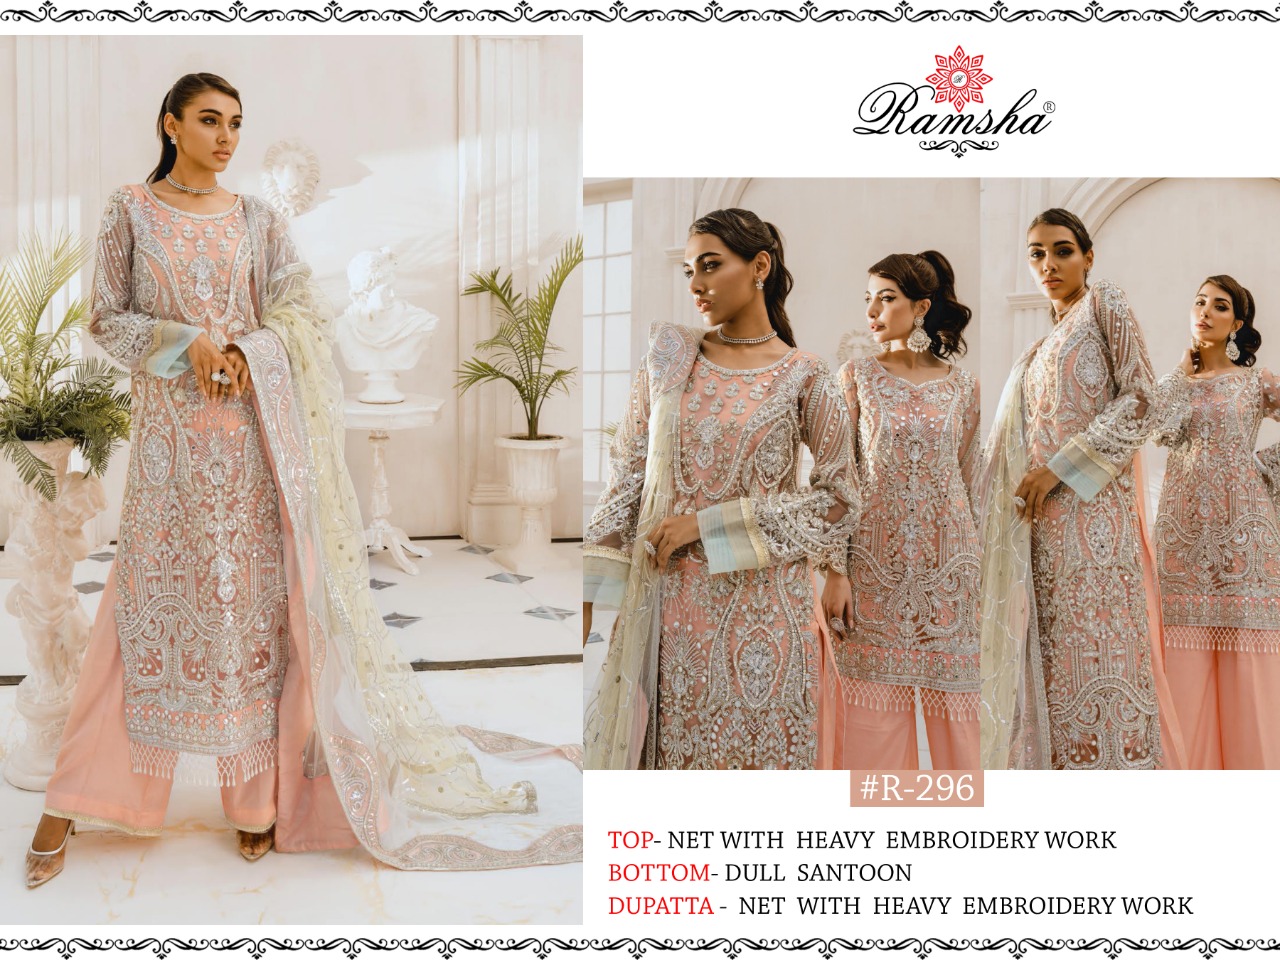 Ramsha R 295 - R 298 Vol 8 Designer Georgette/net With Heavy Embroidery Work Pakistani Pattern Suits In Singles